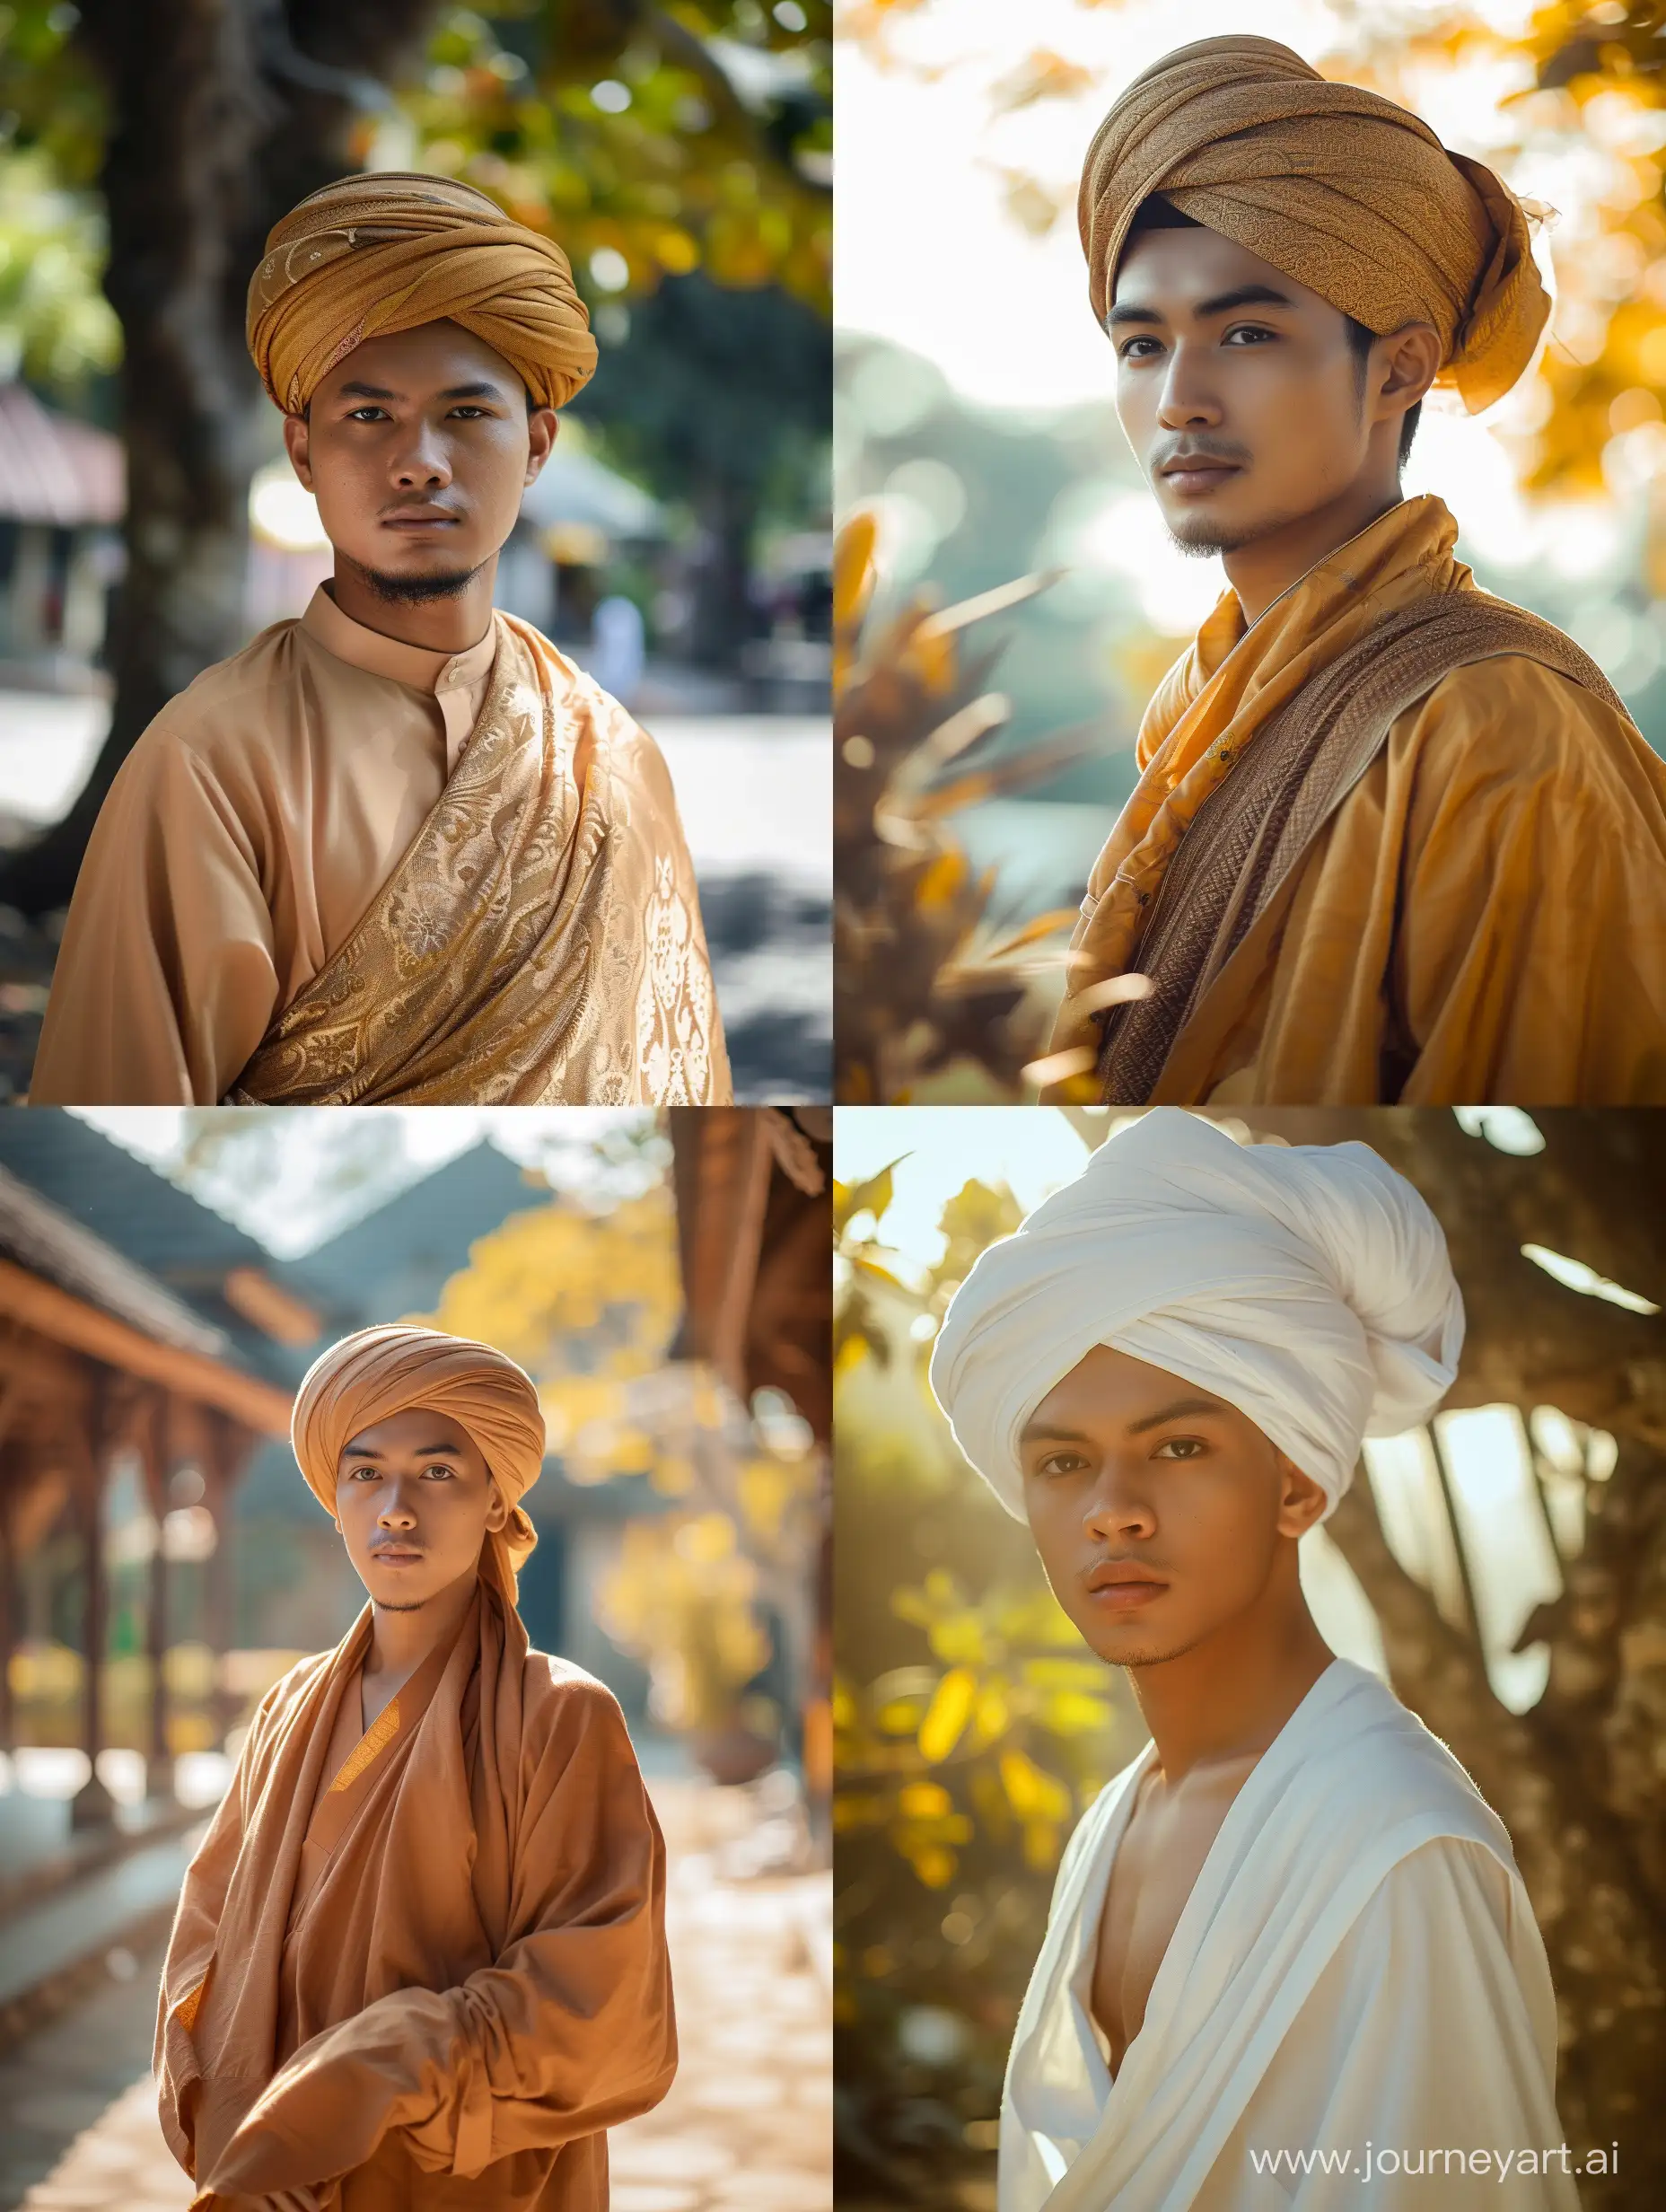 Handsome-Indonesian-Muslim-Man-Poses-in-Traditional-Attire-under-Sunlit-Sky